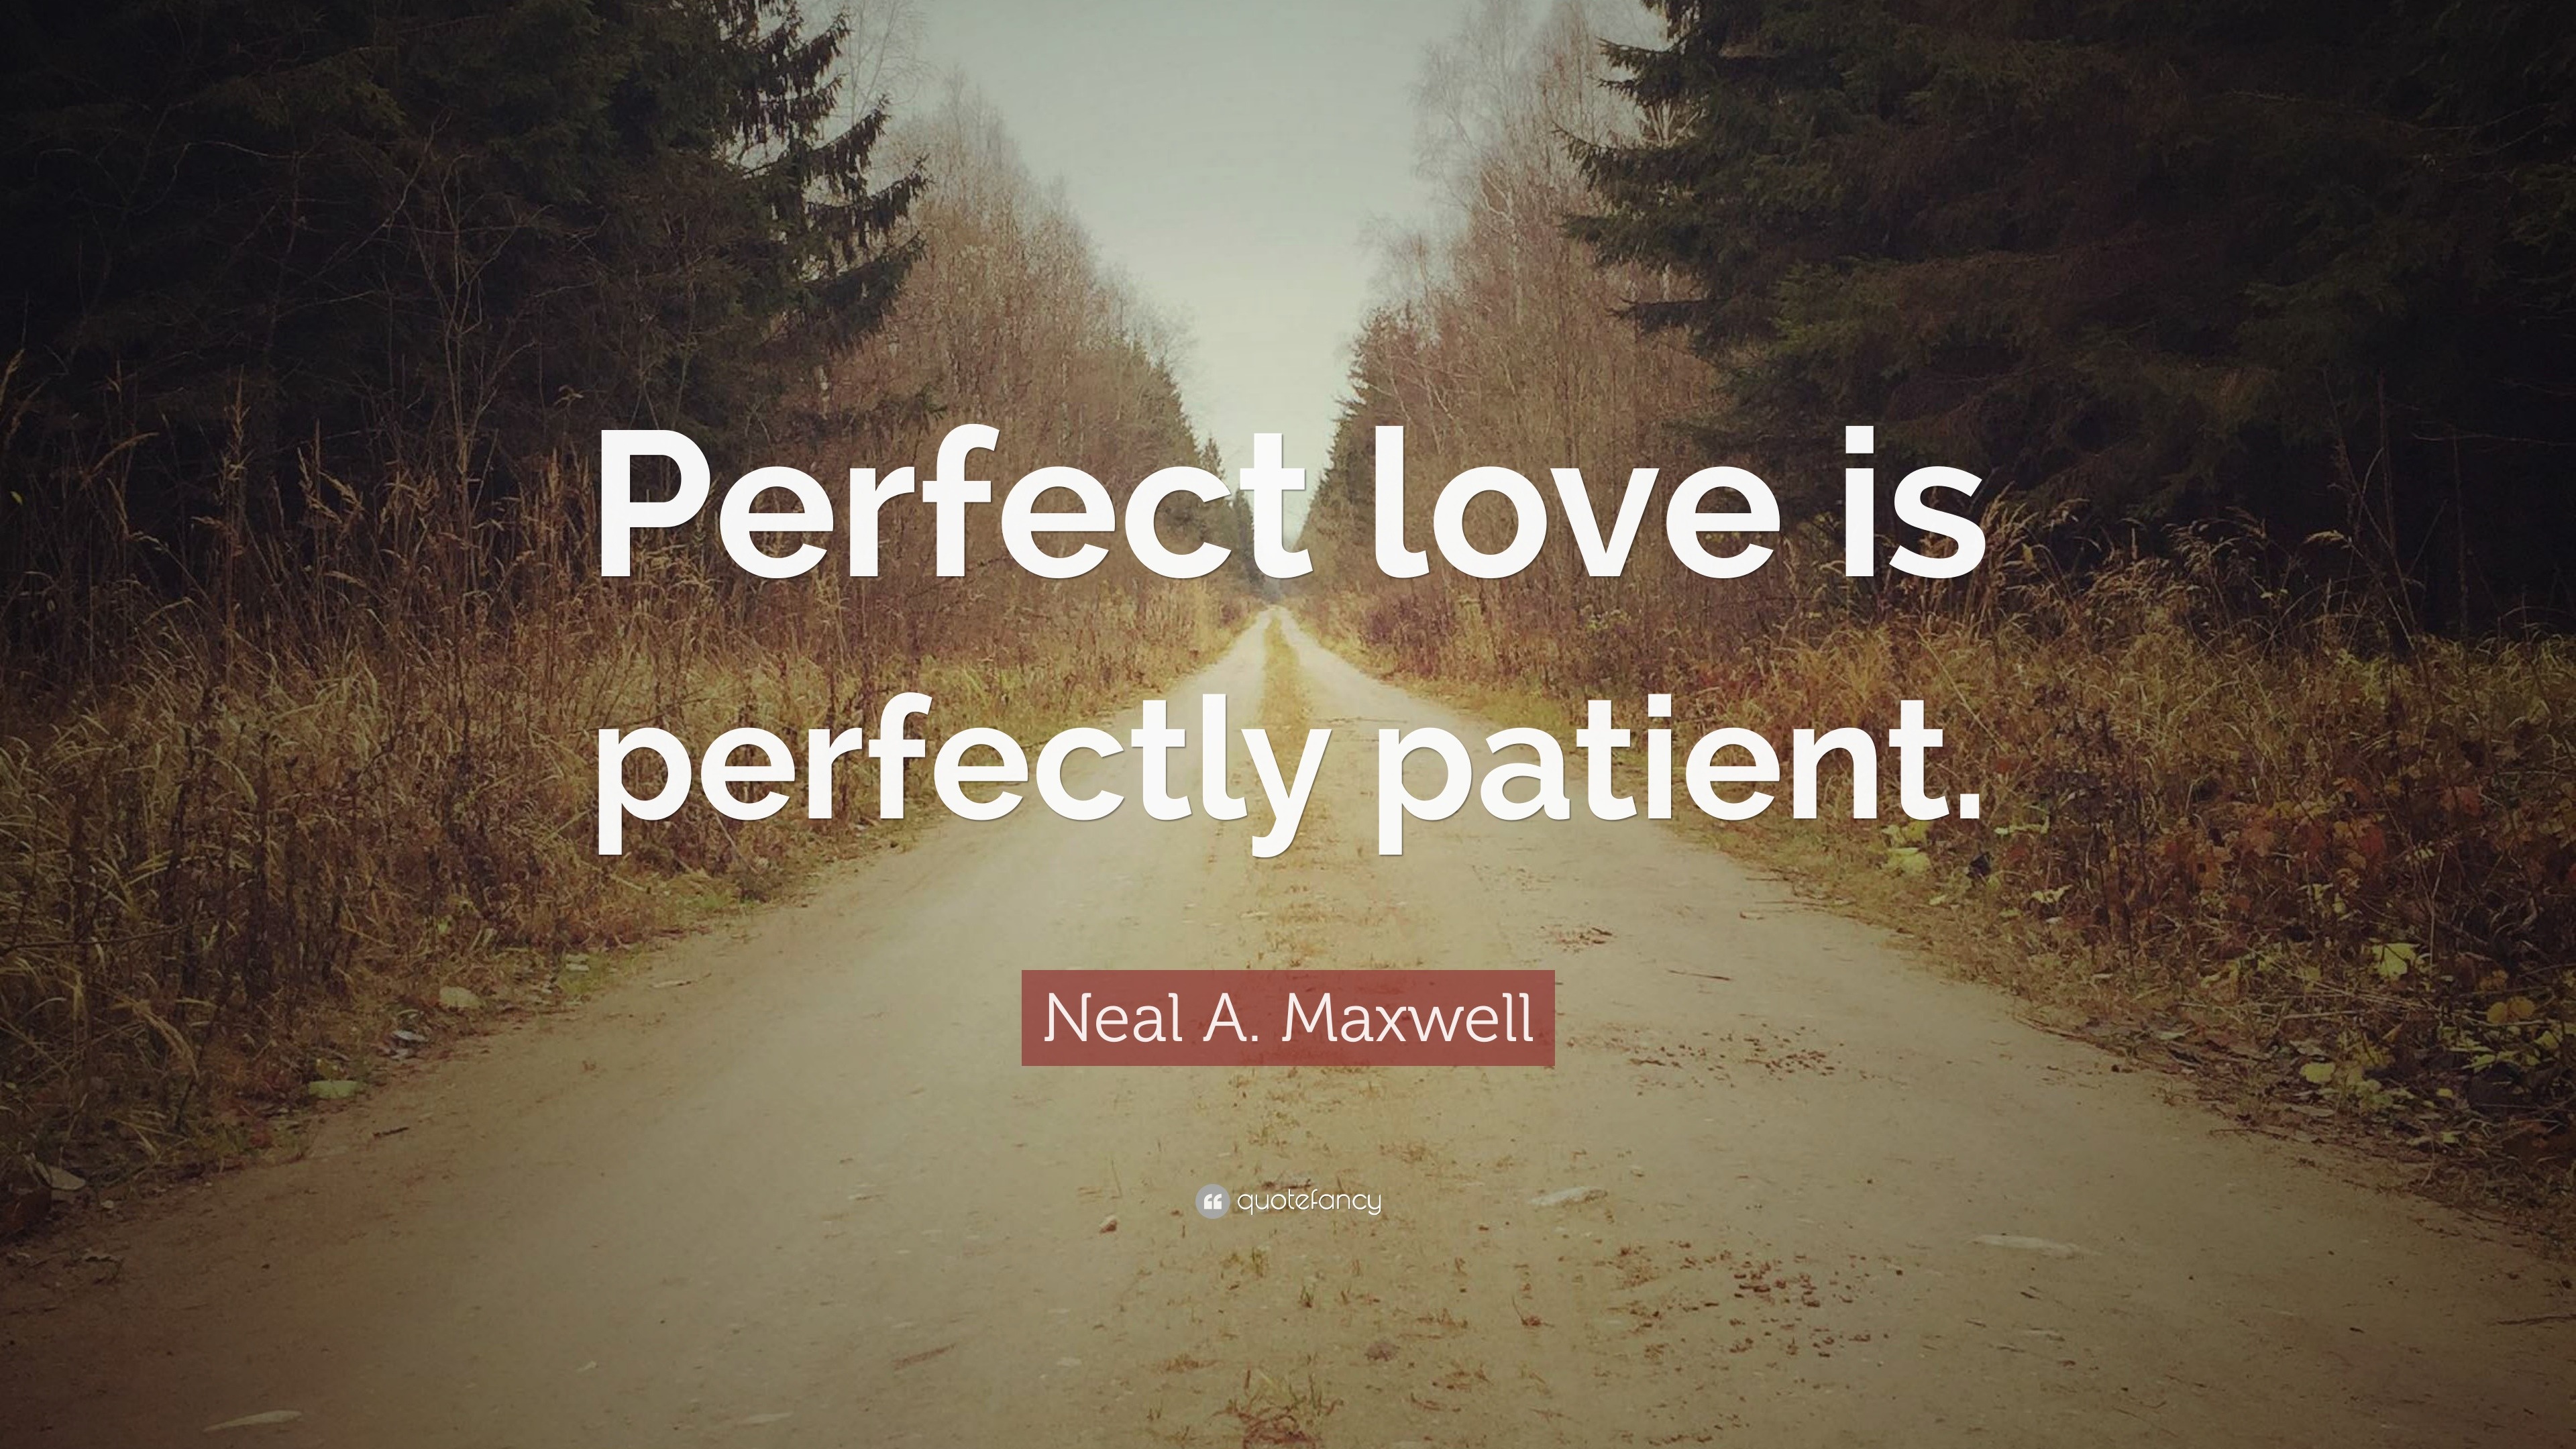 Neal A. Maxwell Quote: “Perfect love is perfectly patient.”